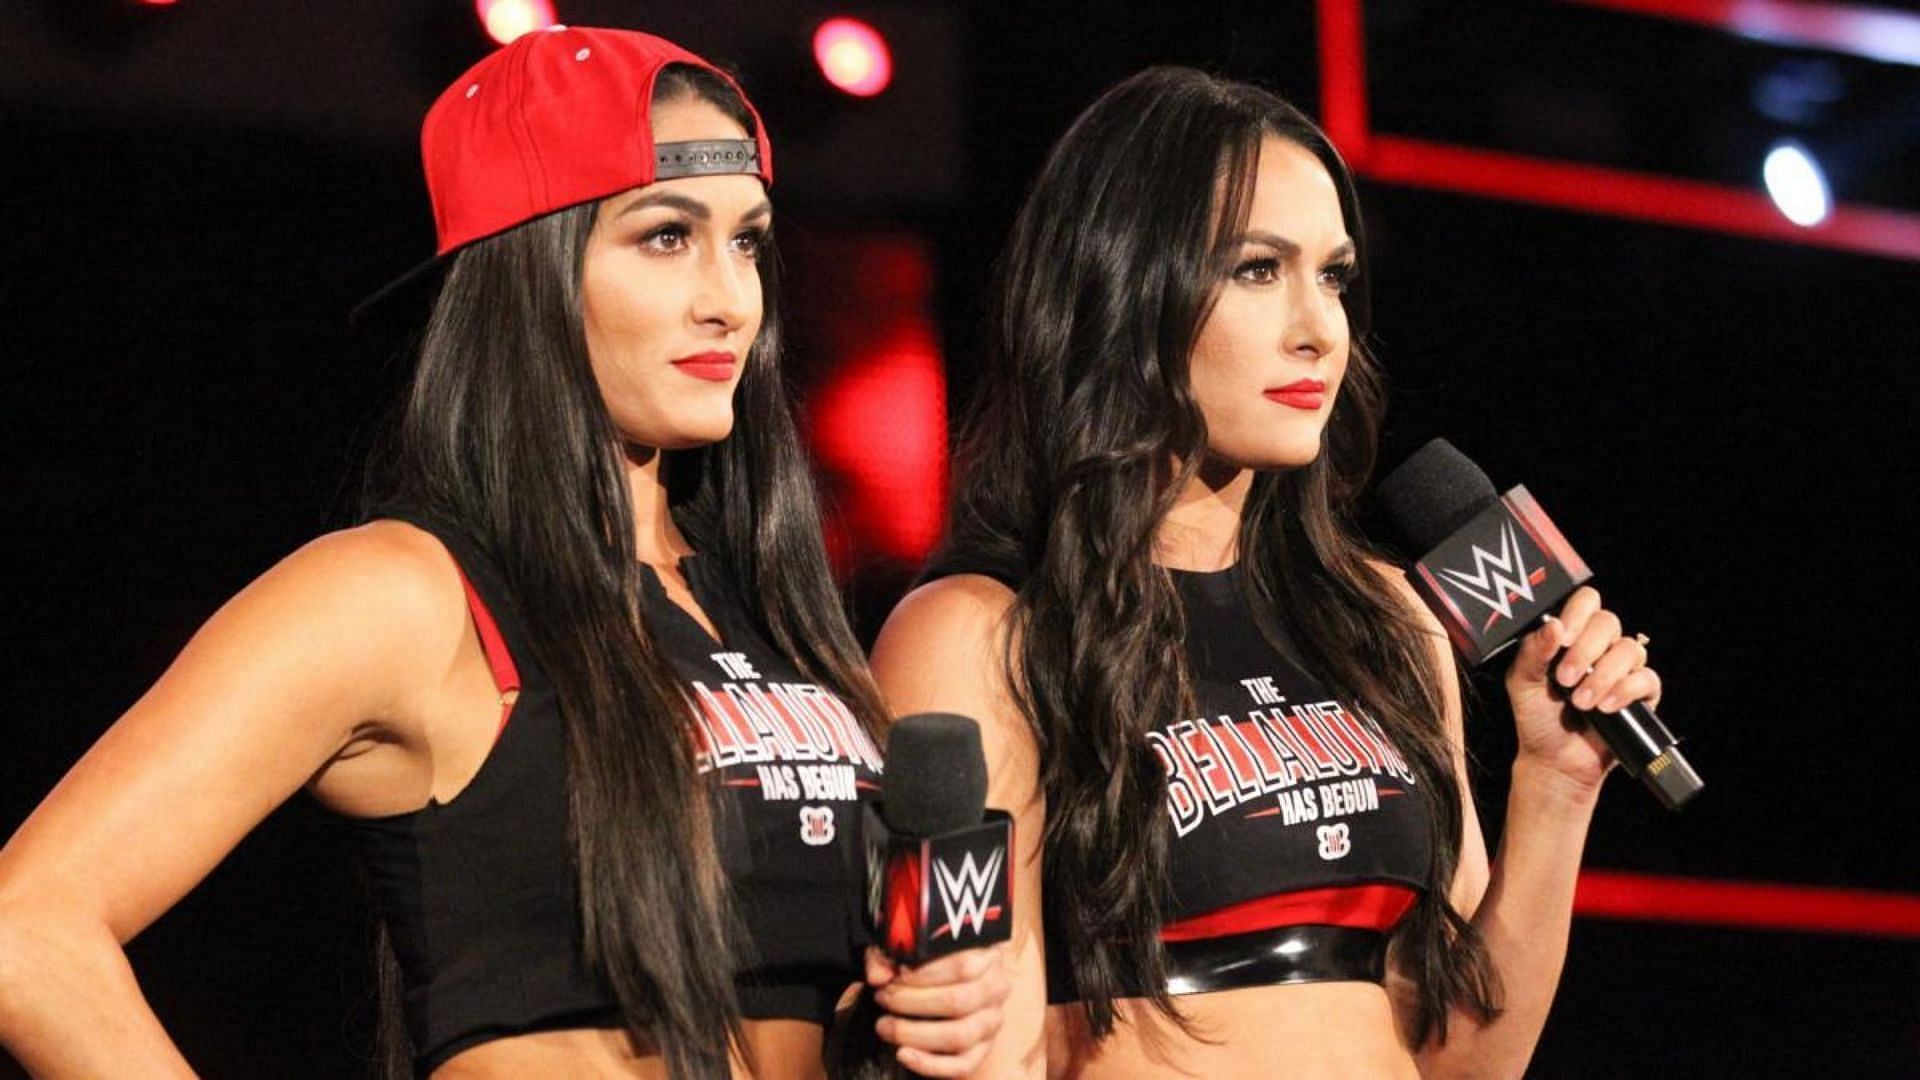 Nikki Garcia (left) and Brie Garcia (right) as The Bella Twins.